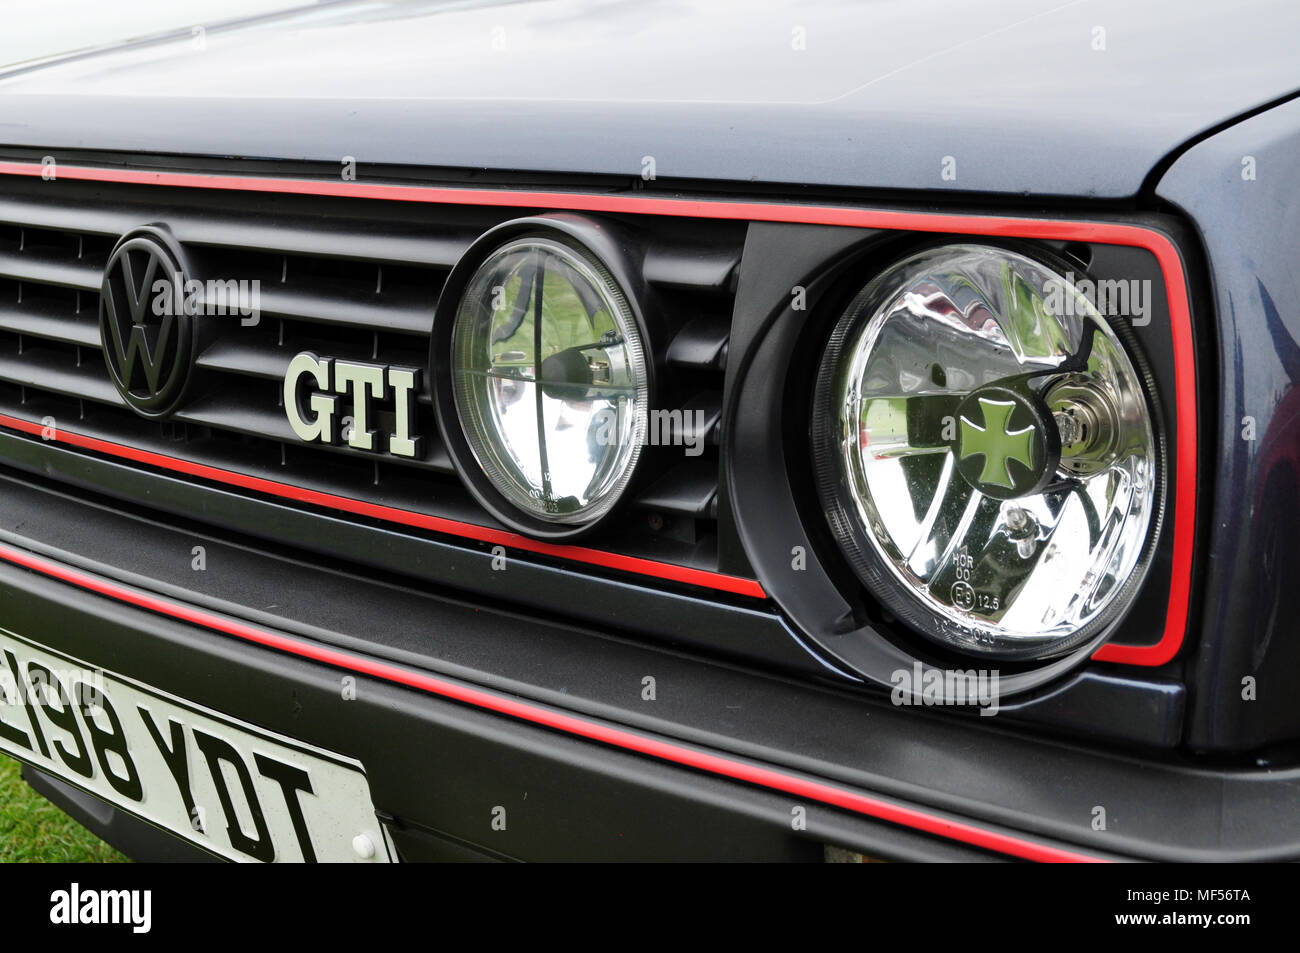 Vw gti badge hi-res stock photography and images - Alamy